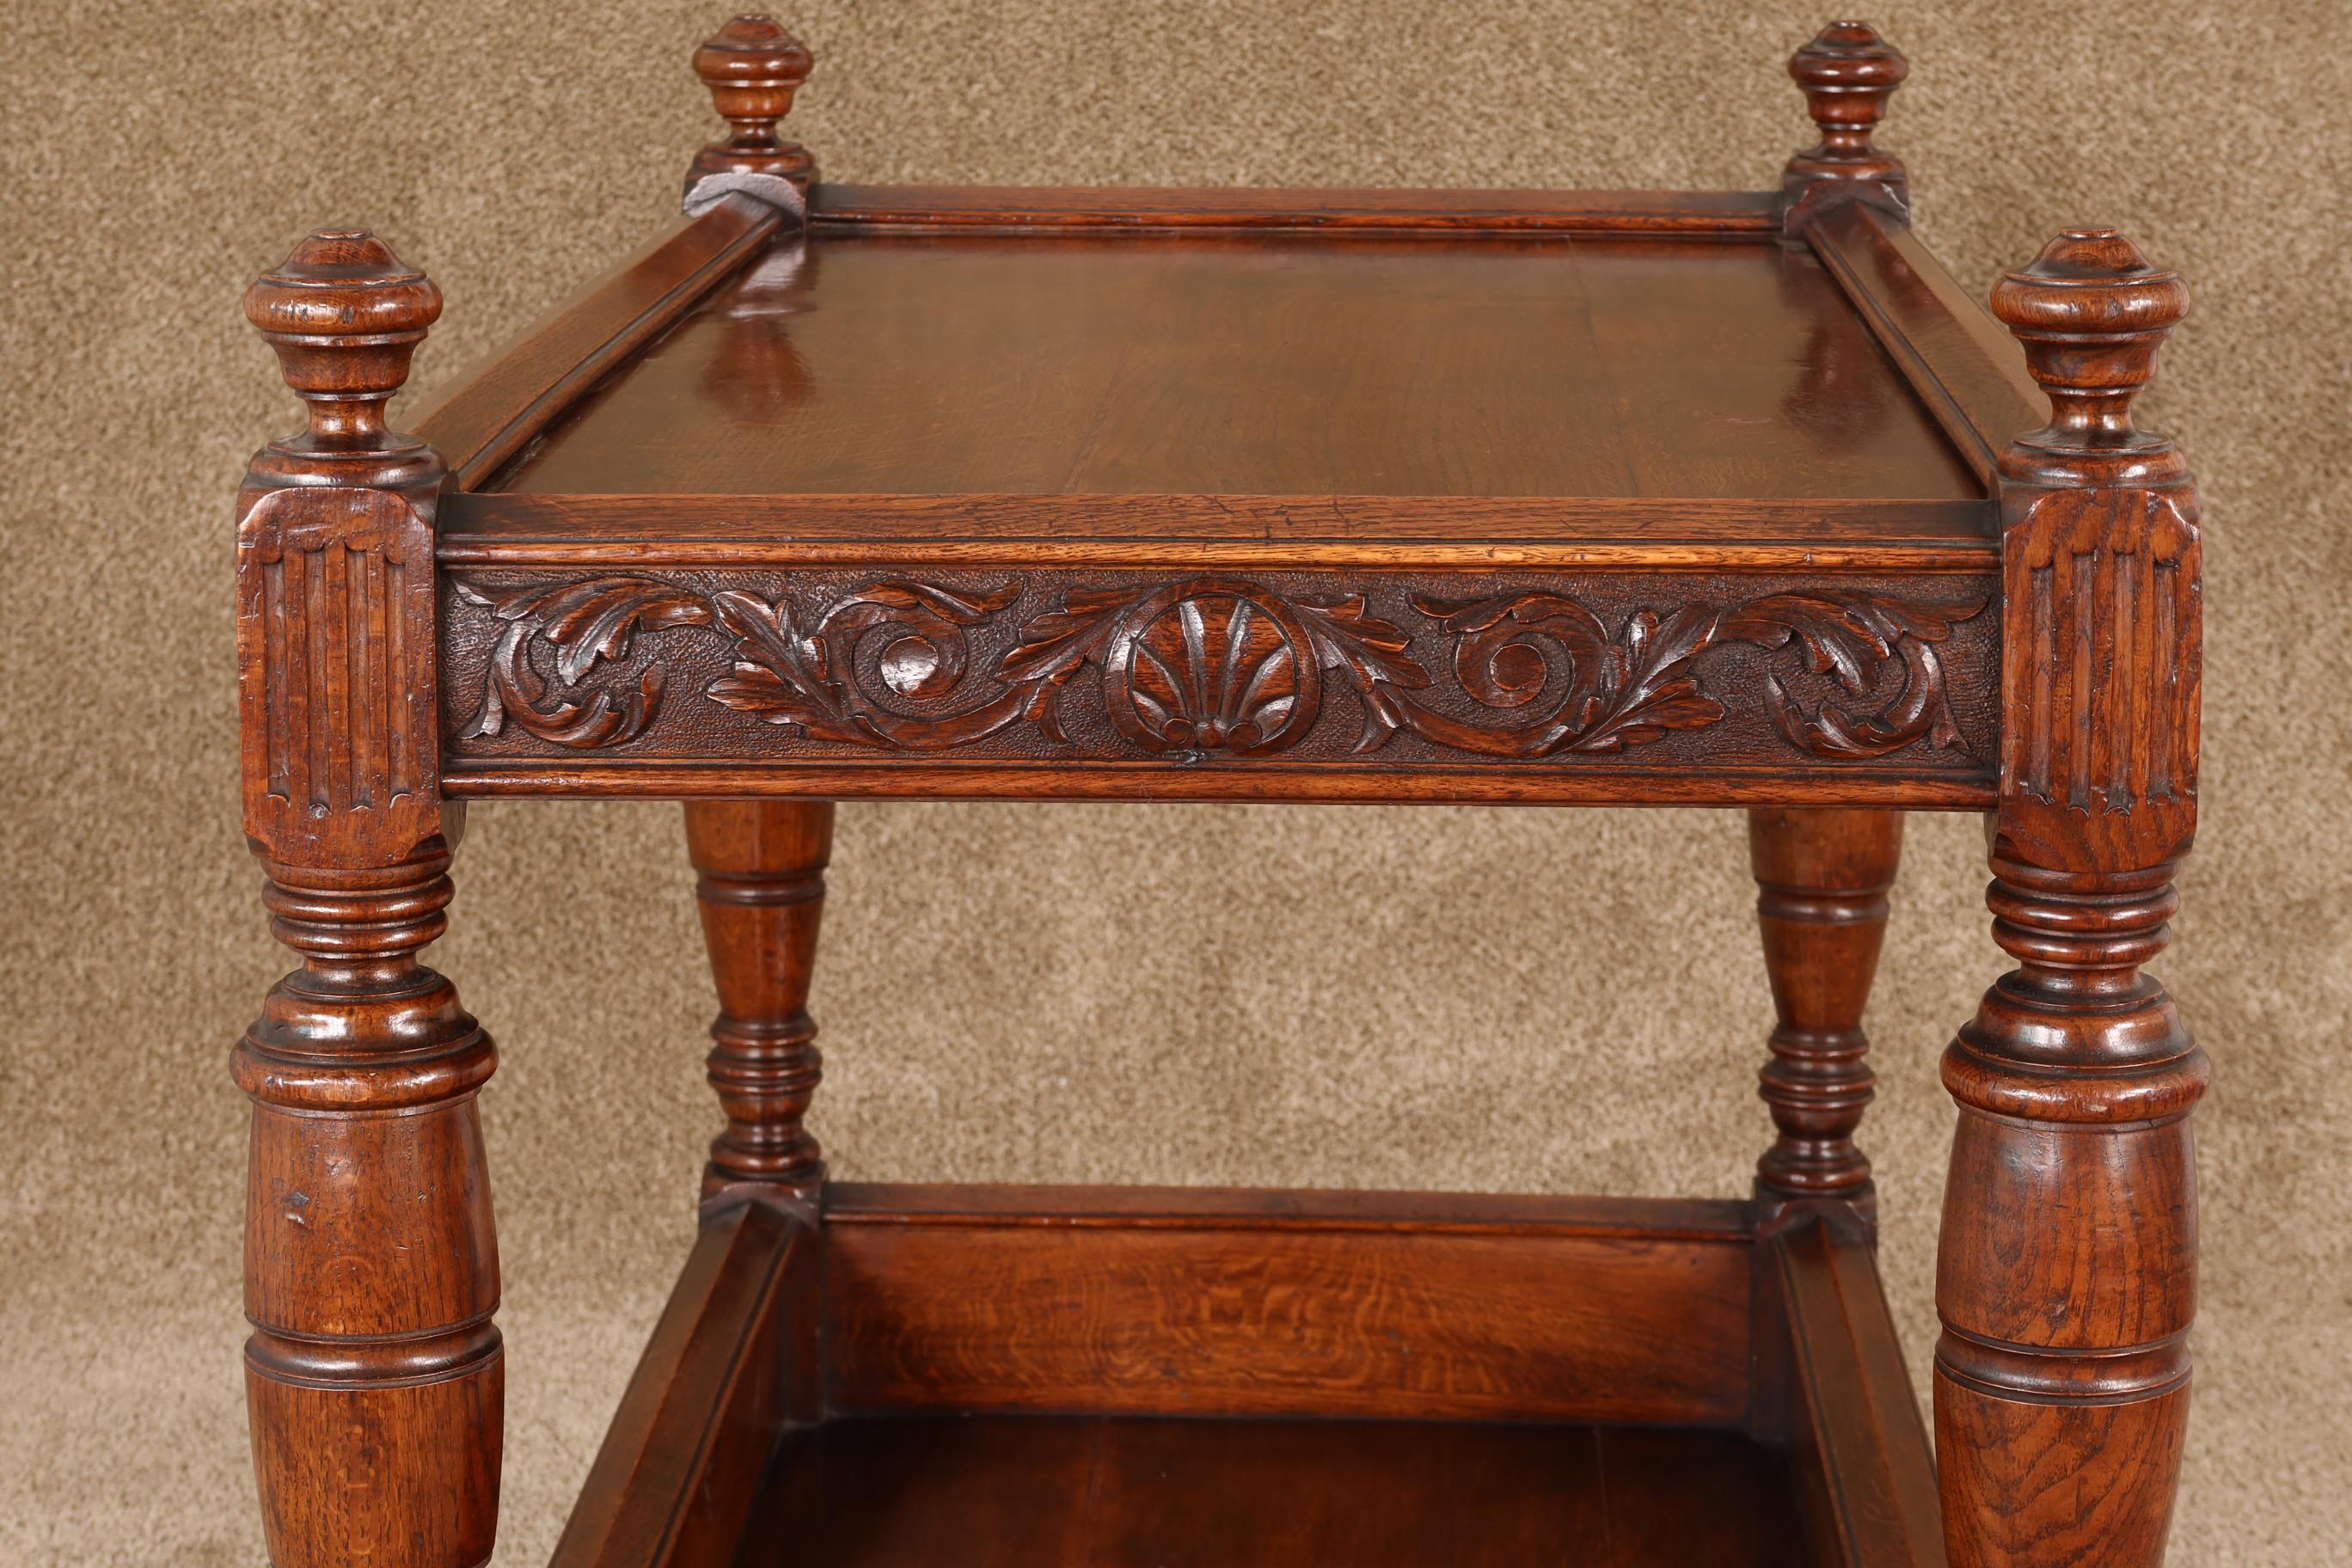 English Tudor Revival Oak Server with Exceptional Carvings, circa 1890 For Sale 1